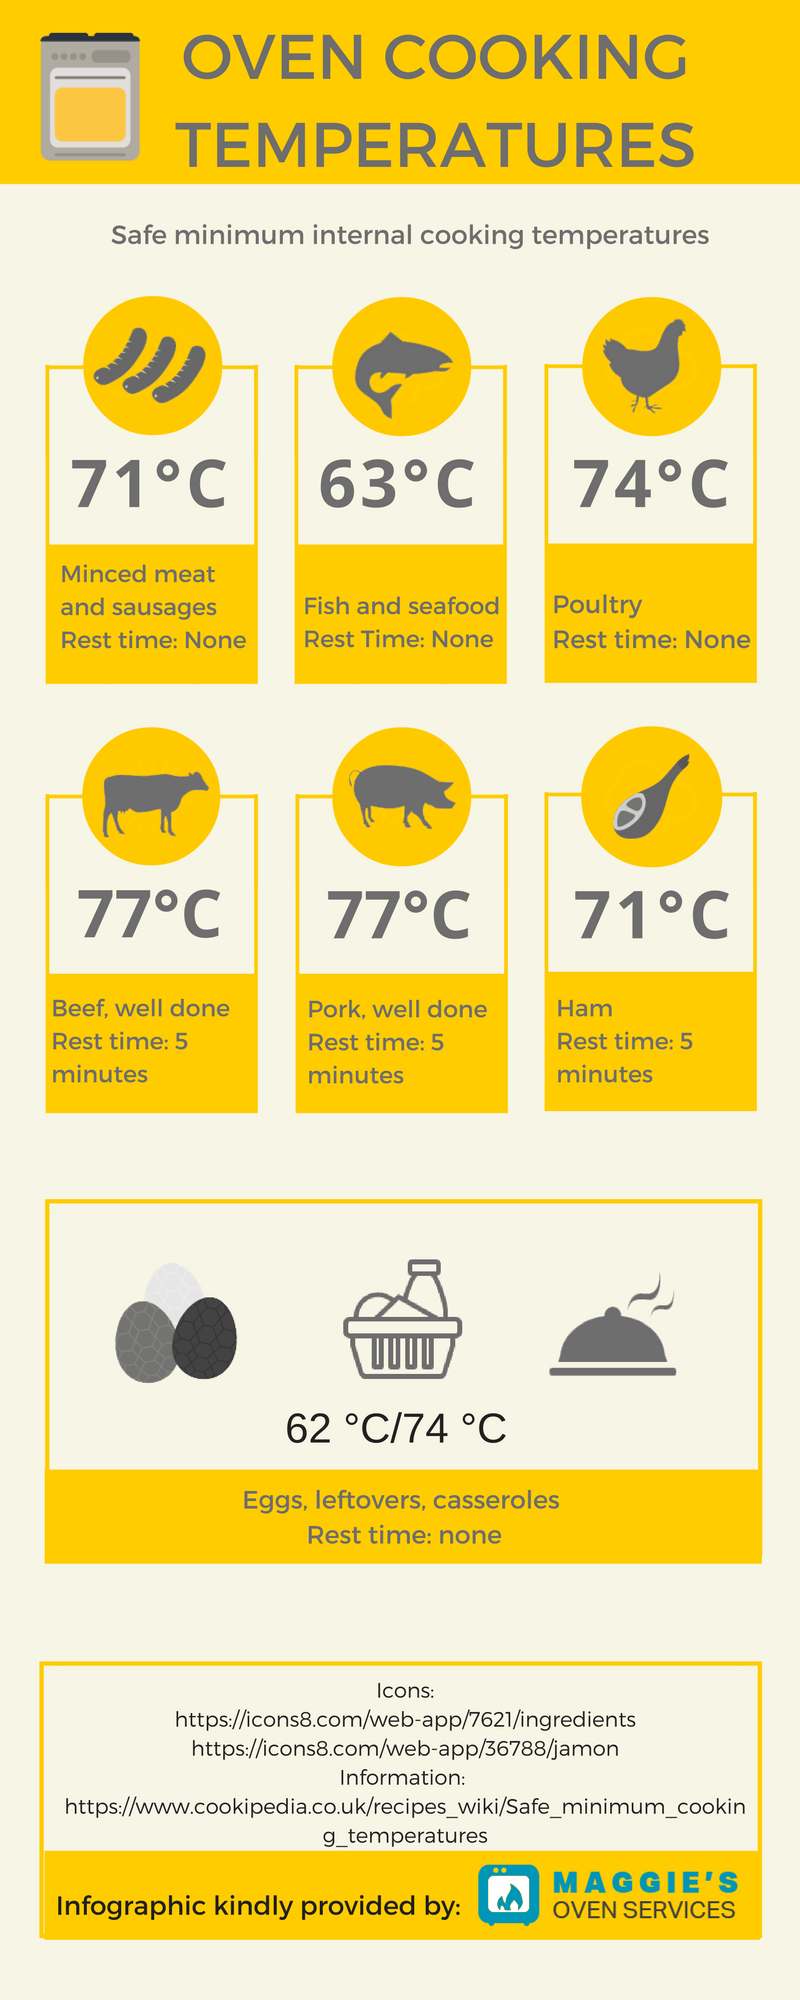 Oven Cooking Temperatures [Infographic] - Maggie's Oven Services